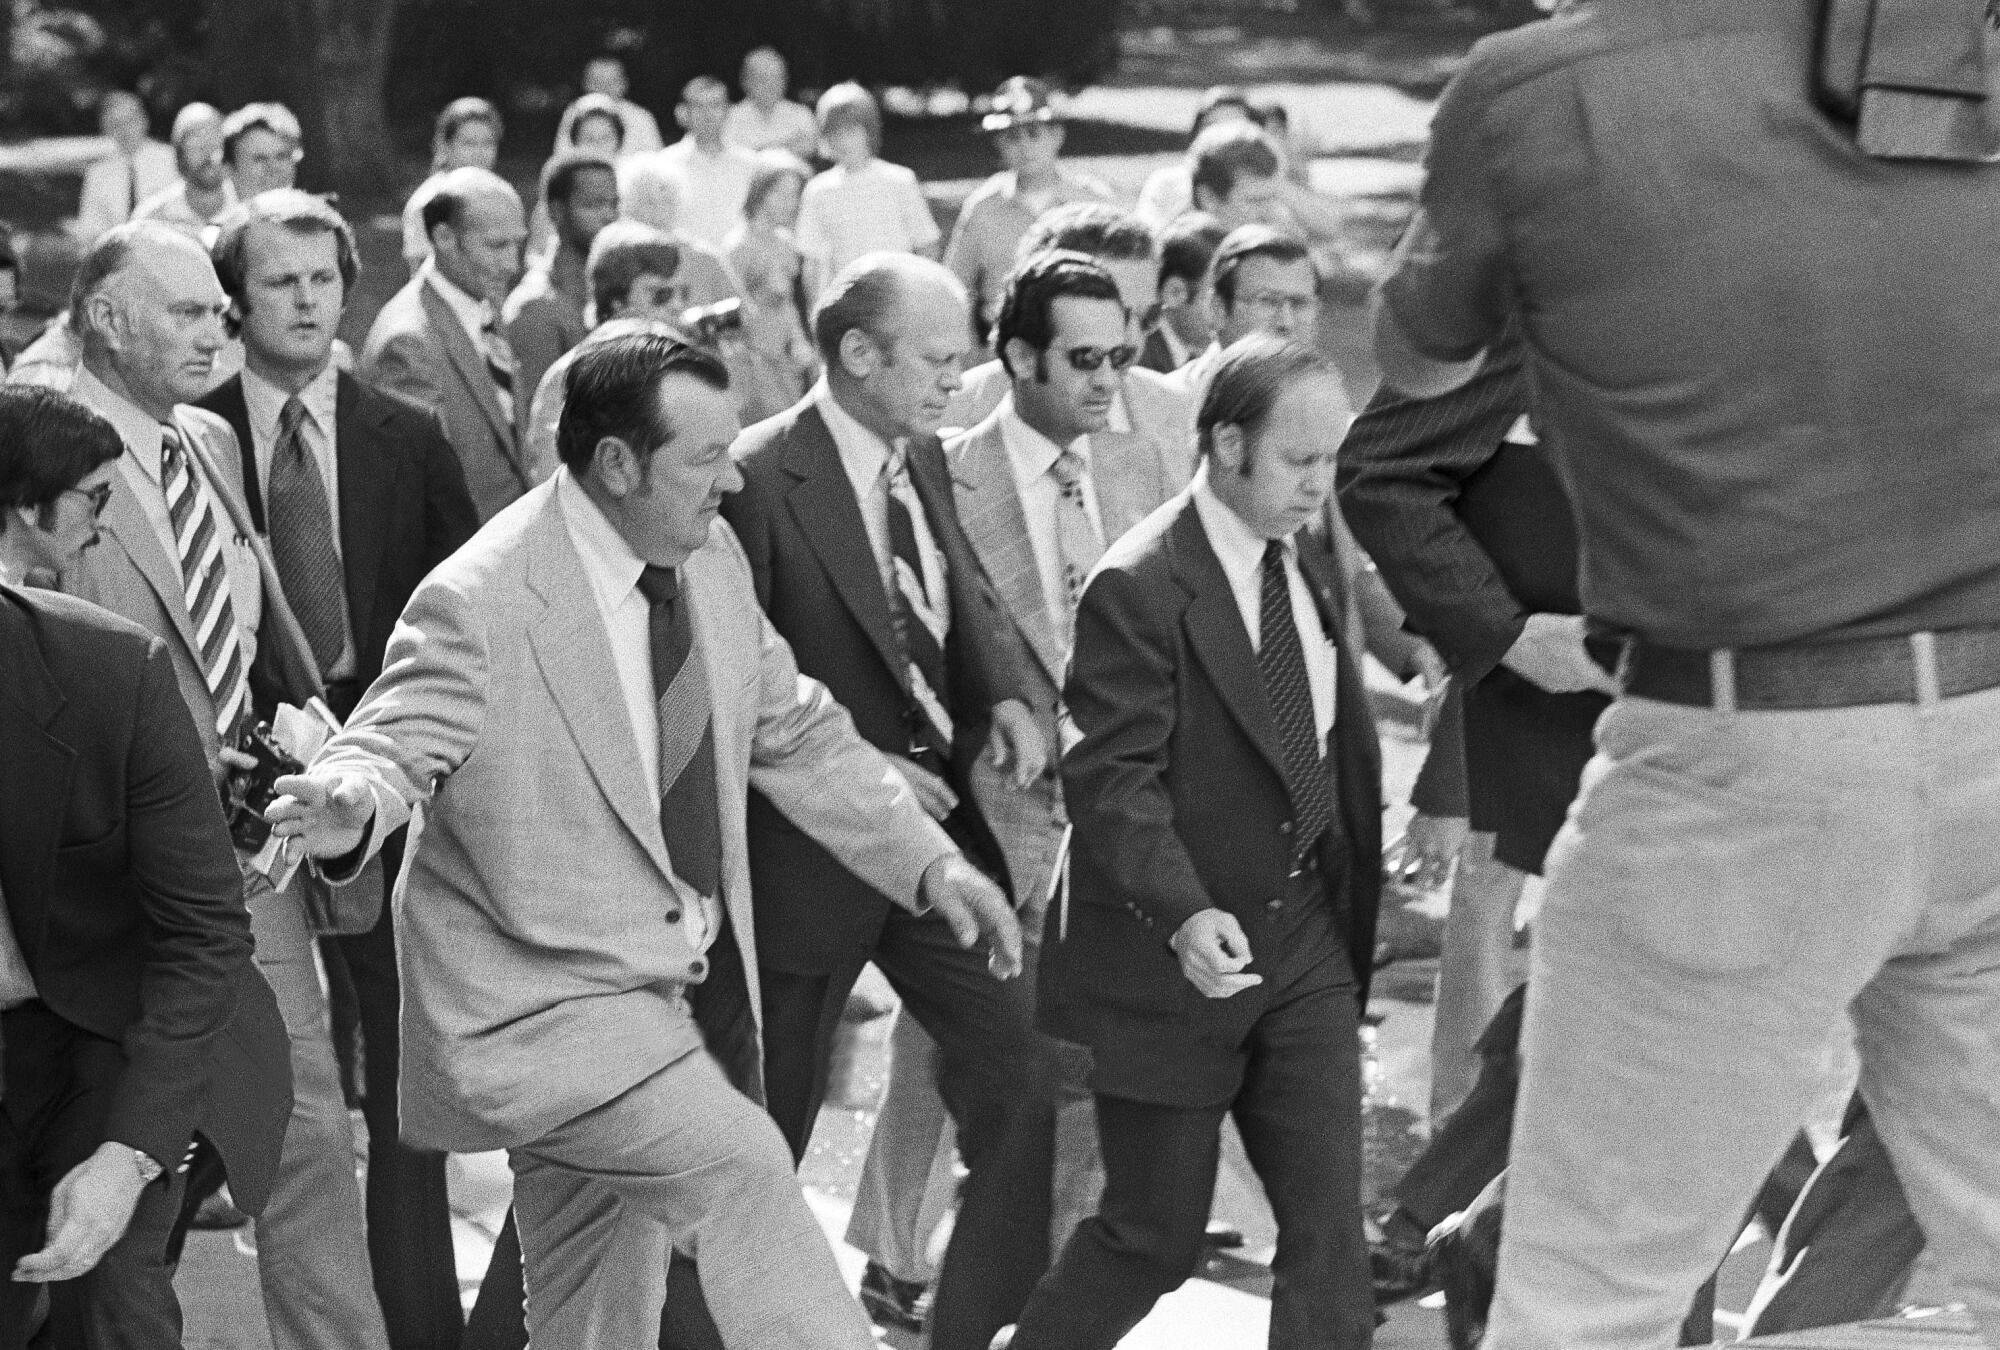 President Ford is hustled to safety by Secret Service agents.